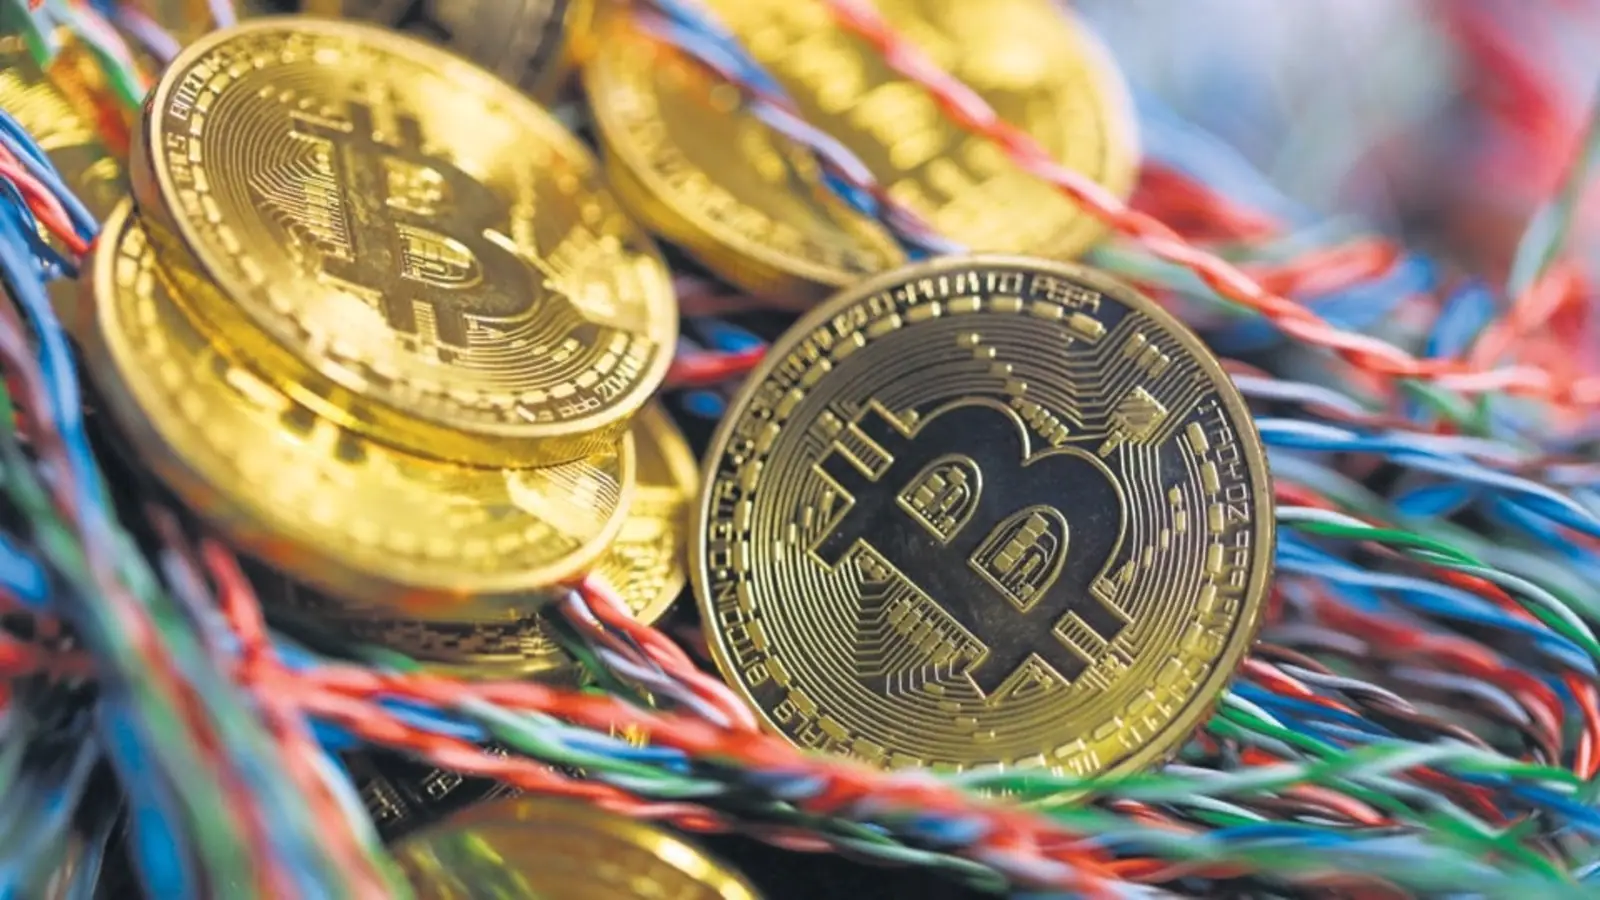 Bitcoin Drops to Three-Week Low as Global Markets Turn Risk Off